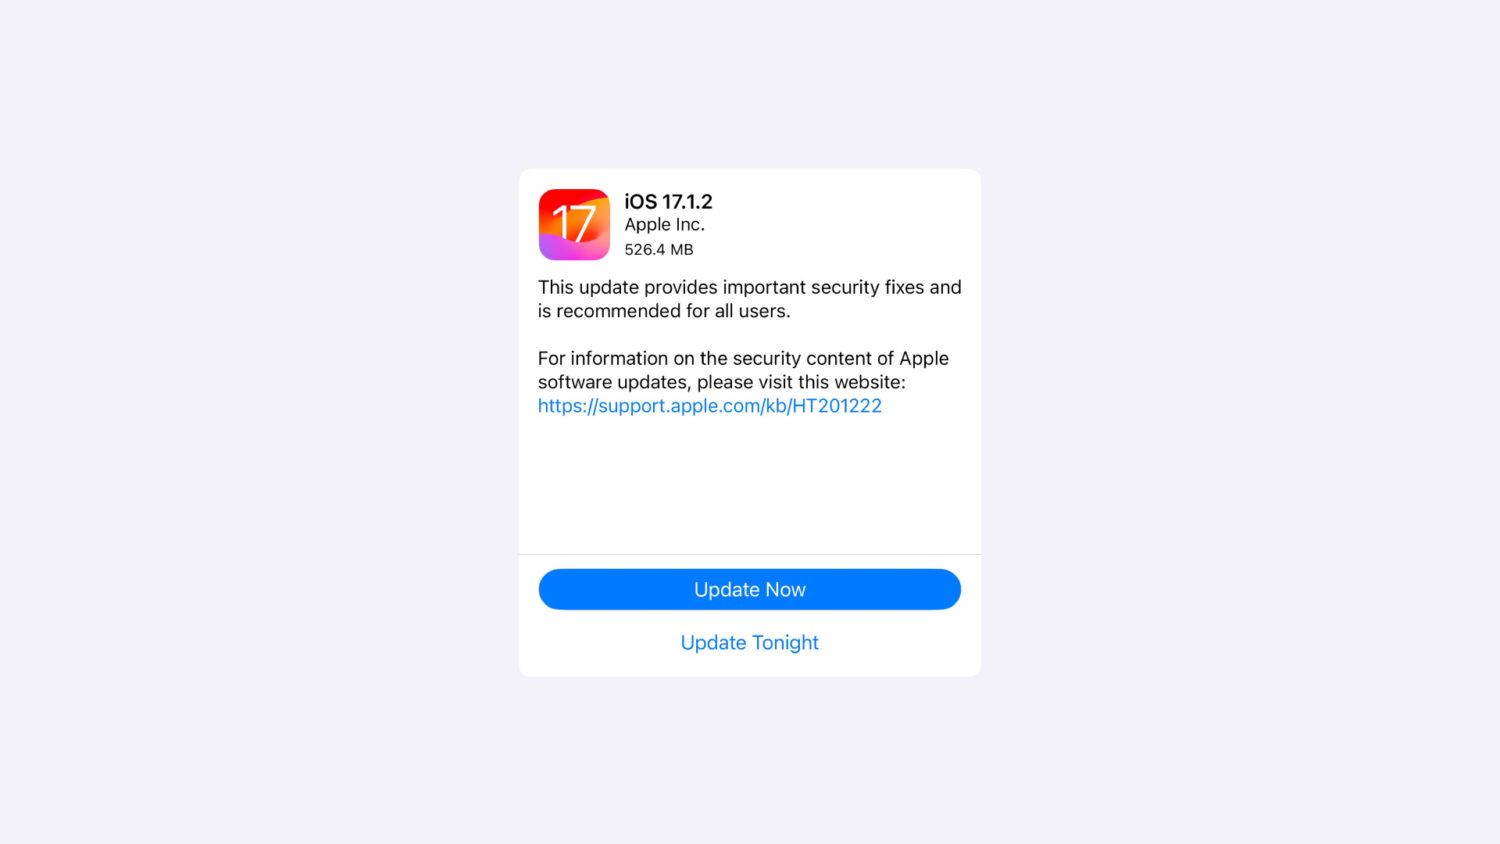 What’s New In iOS 17.1.2?